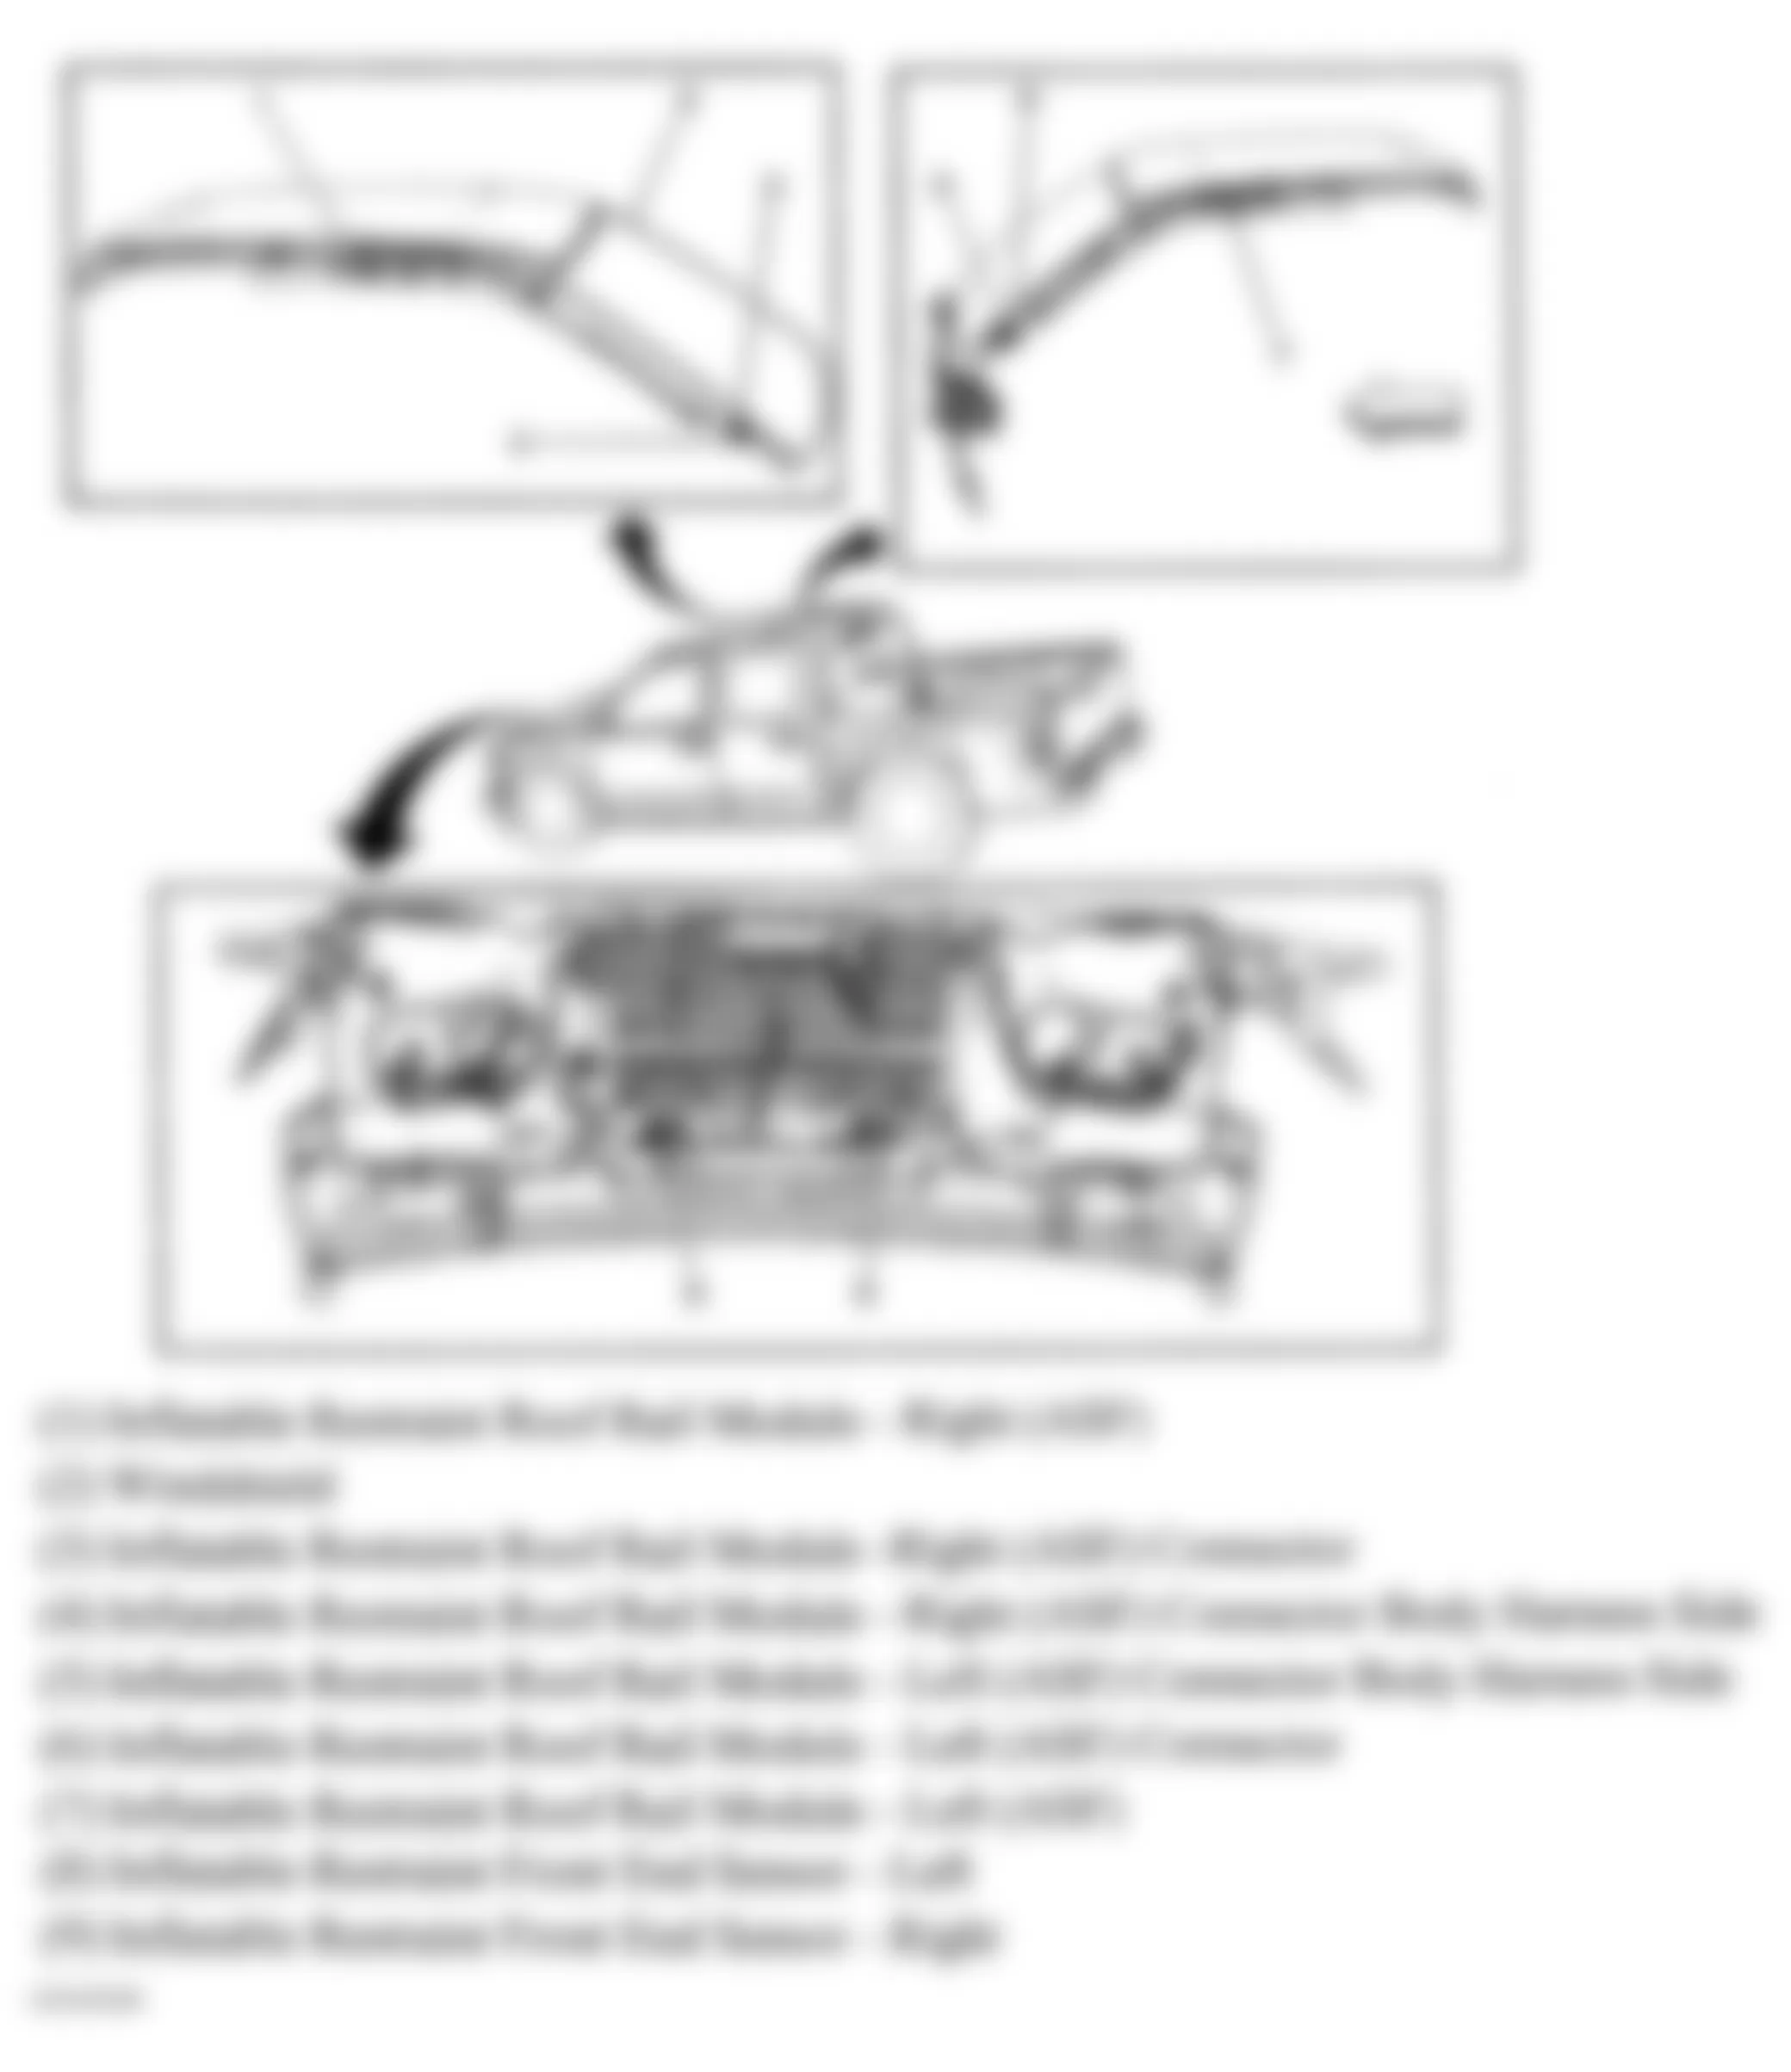 Isuzu i-290 S 2008 - Component Locations -  SIR System Front/Roof Rail